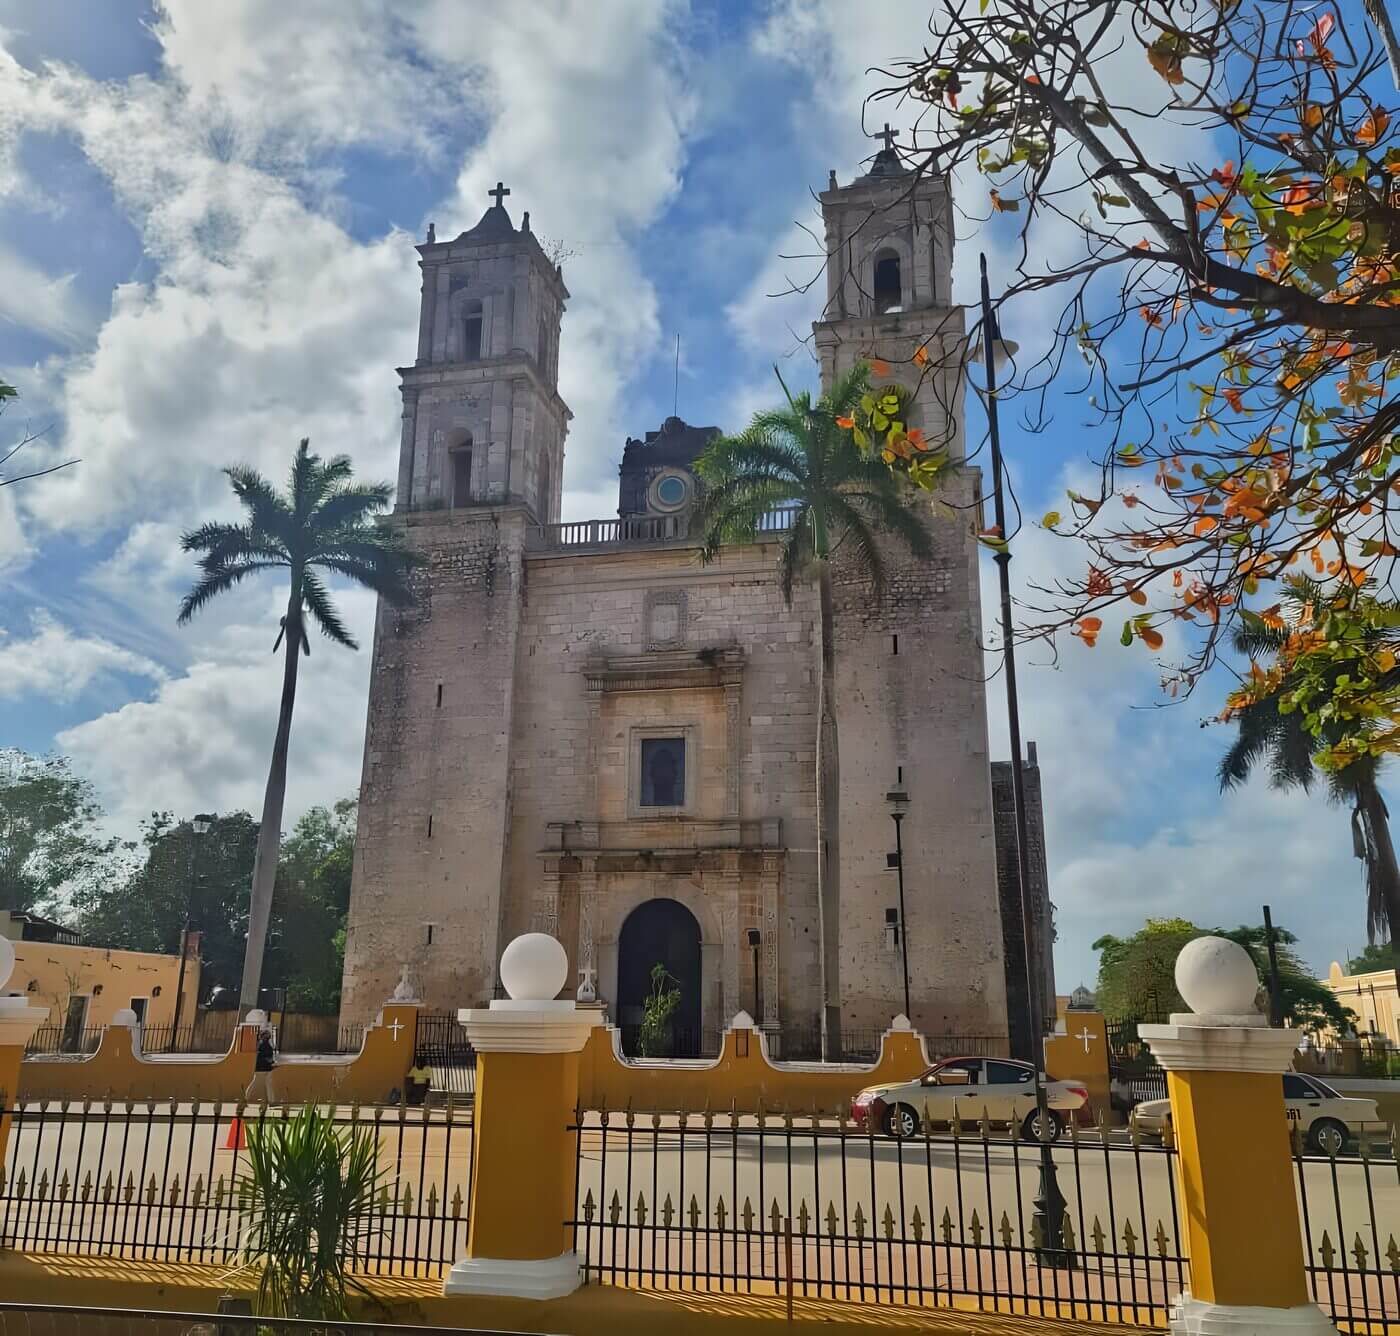 A photo of the facade of the San Gervasio Cathedral in Valladolid, Yucatan, Mexico. The cathedral is made of white stone and has two bell towers. There are palm trees in front of the cathedral and a blue sky with white clouds in the background.